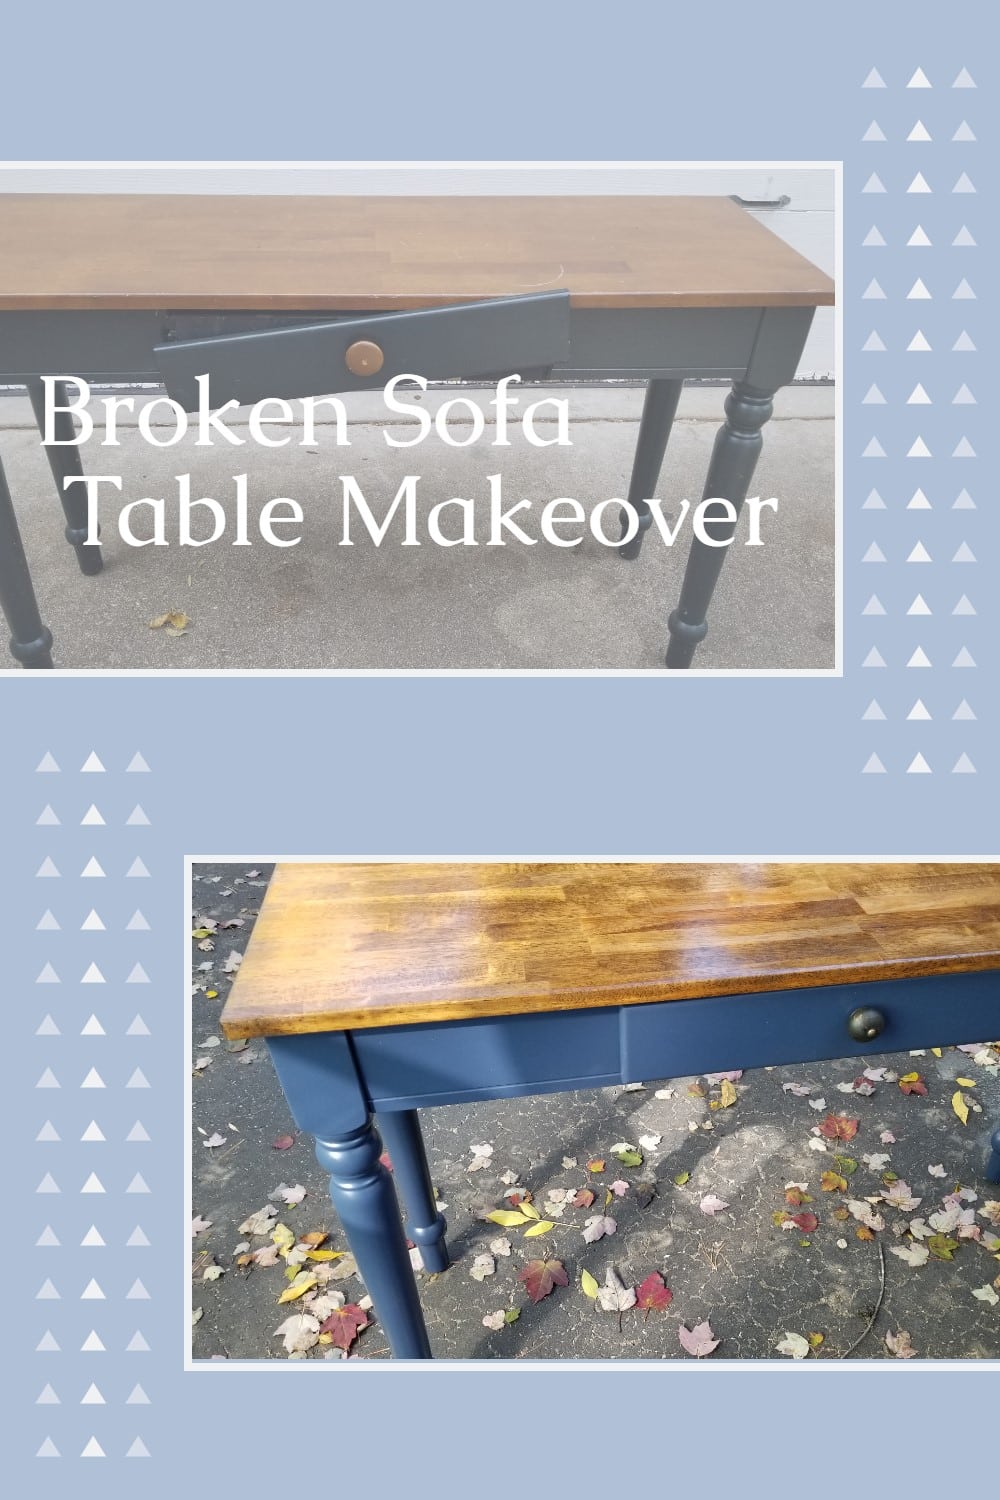 This table was found on the side of the road, but maybe you have a sofa table that needs a new and fresh update. It's easier than you think with these great tips. Change up the color, refinish the top and make any needed repairs. So easy, you can do this in a few hours. #MyRepurposedLife #table #makeover #sofatable #easy #project via @repurposedlife